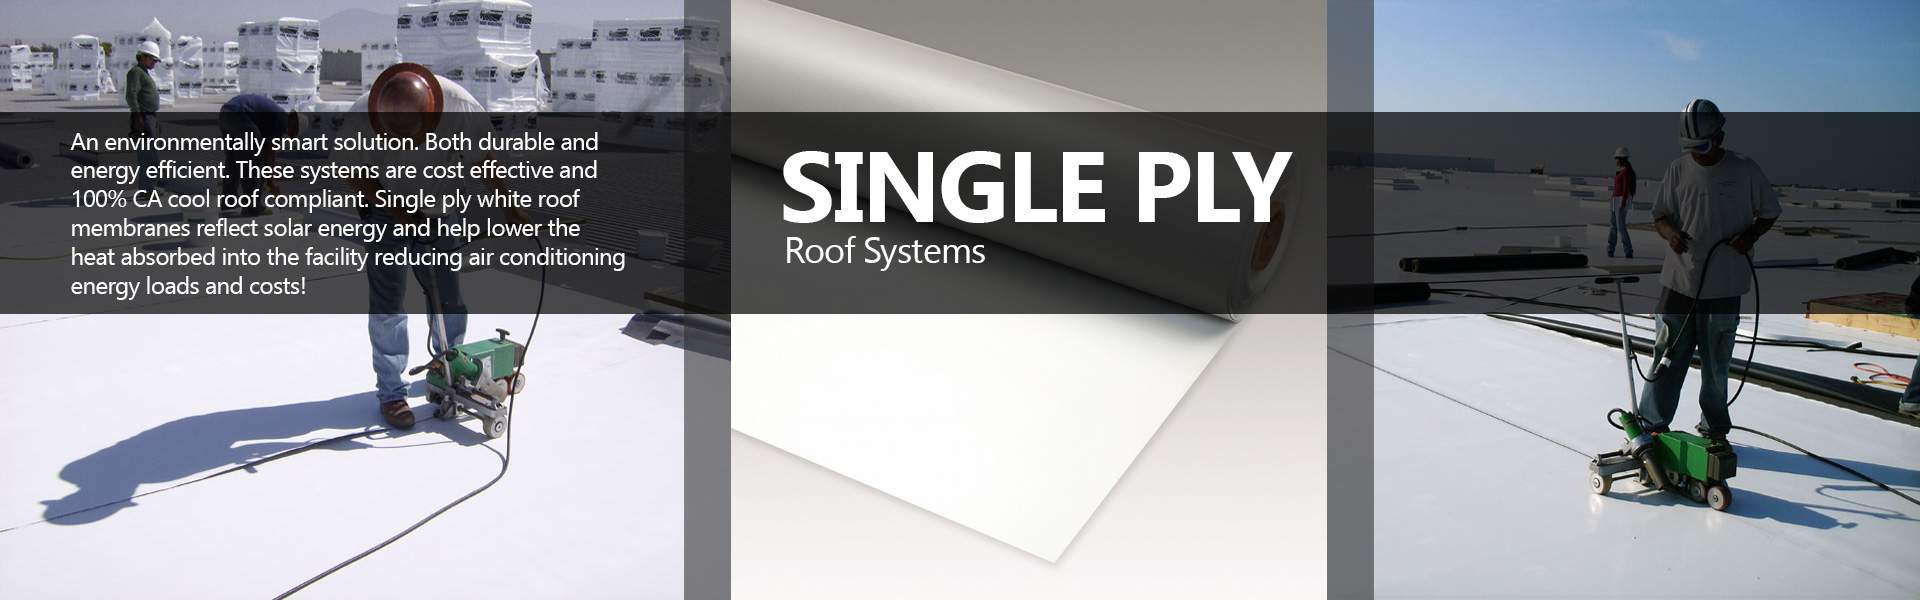 single-ply-roofing